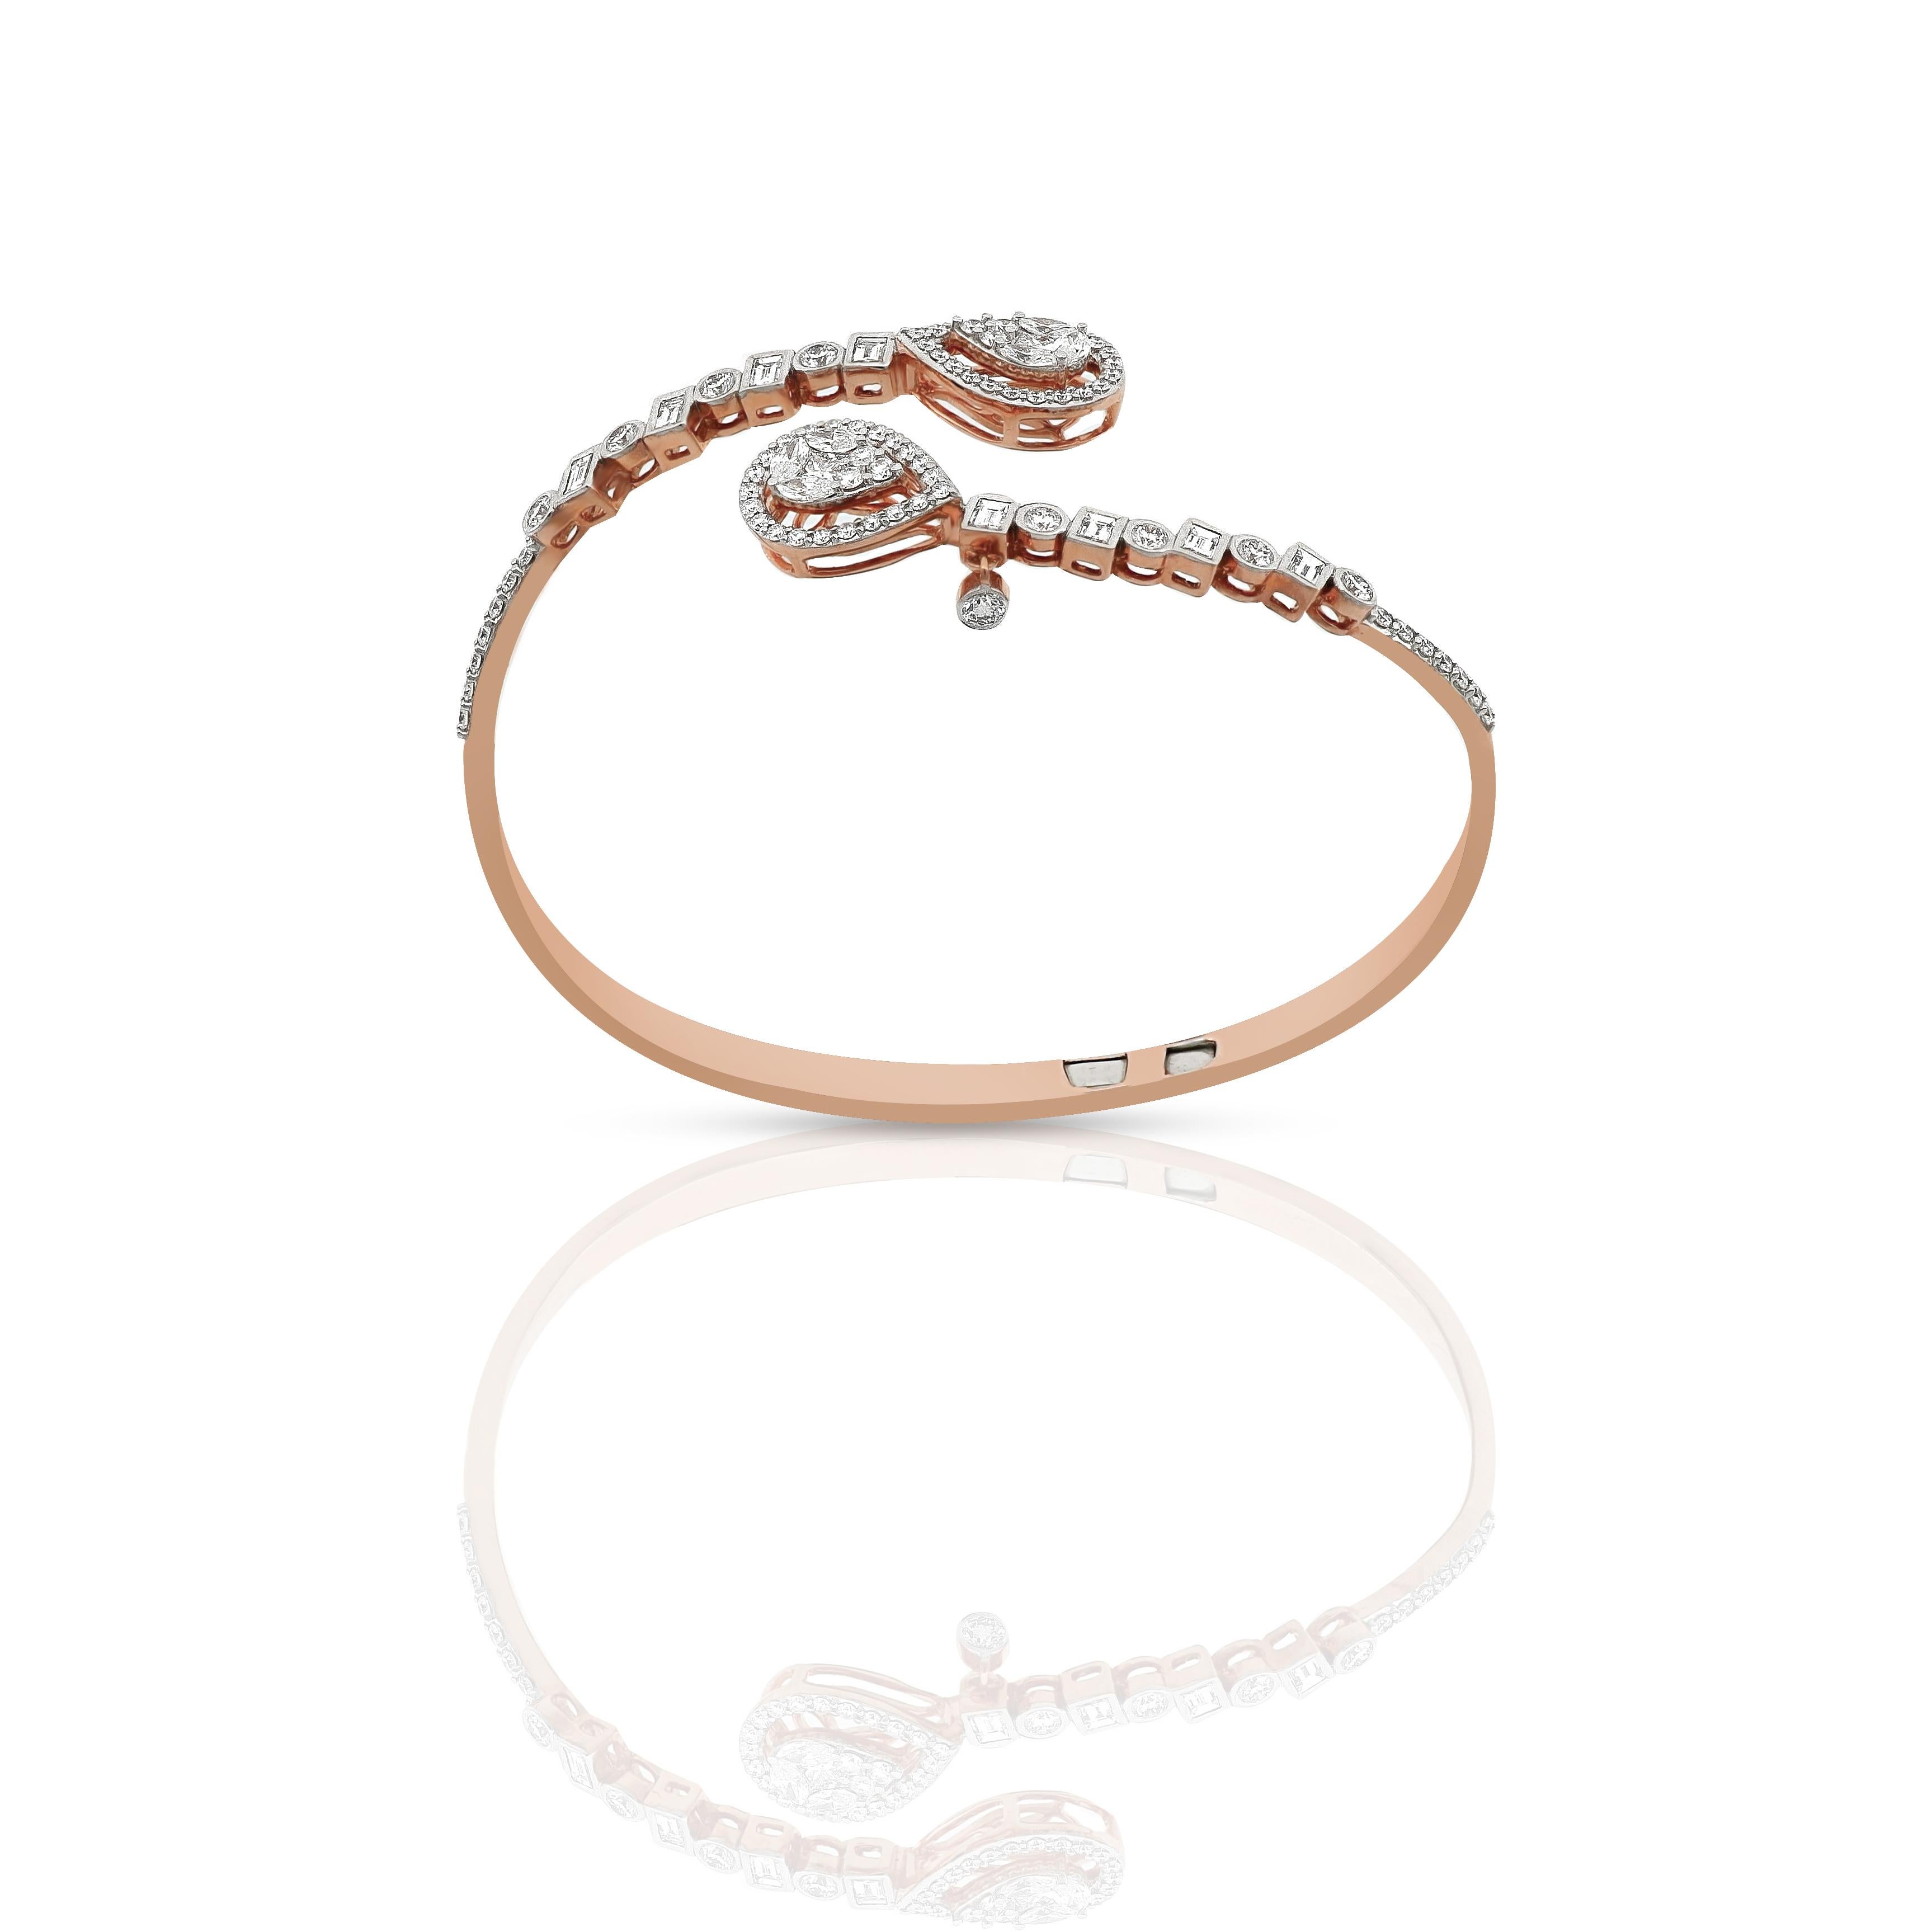 Amwaj flexible wraparound diamond bangle in 18 karat rose gold features a delicate row of round and baguette cut diamonds that lead the eye towards 2 groups of marquise, princess and round diamonds forming 2 pear shapes.
18 Karat Rose Gold
Diamond